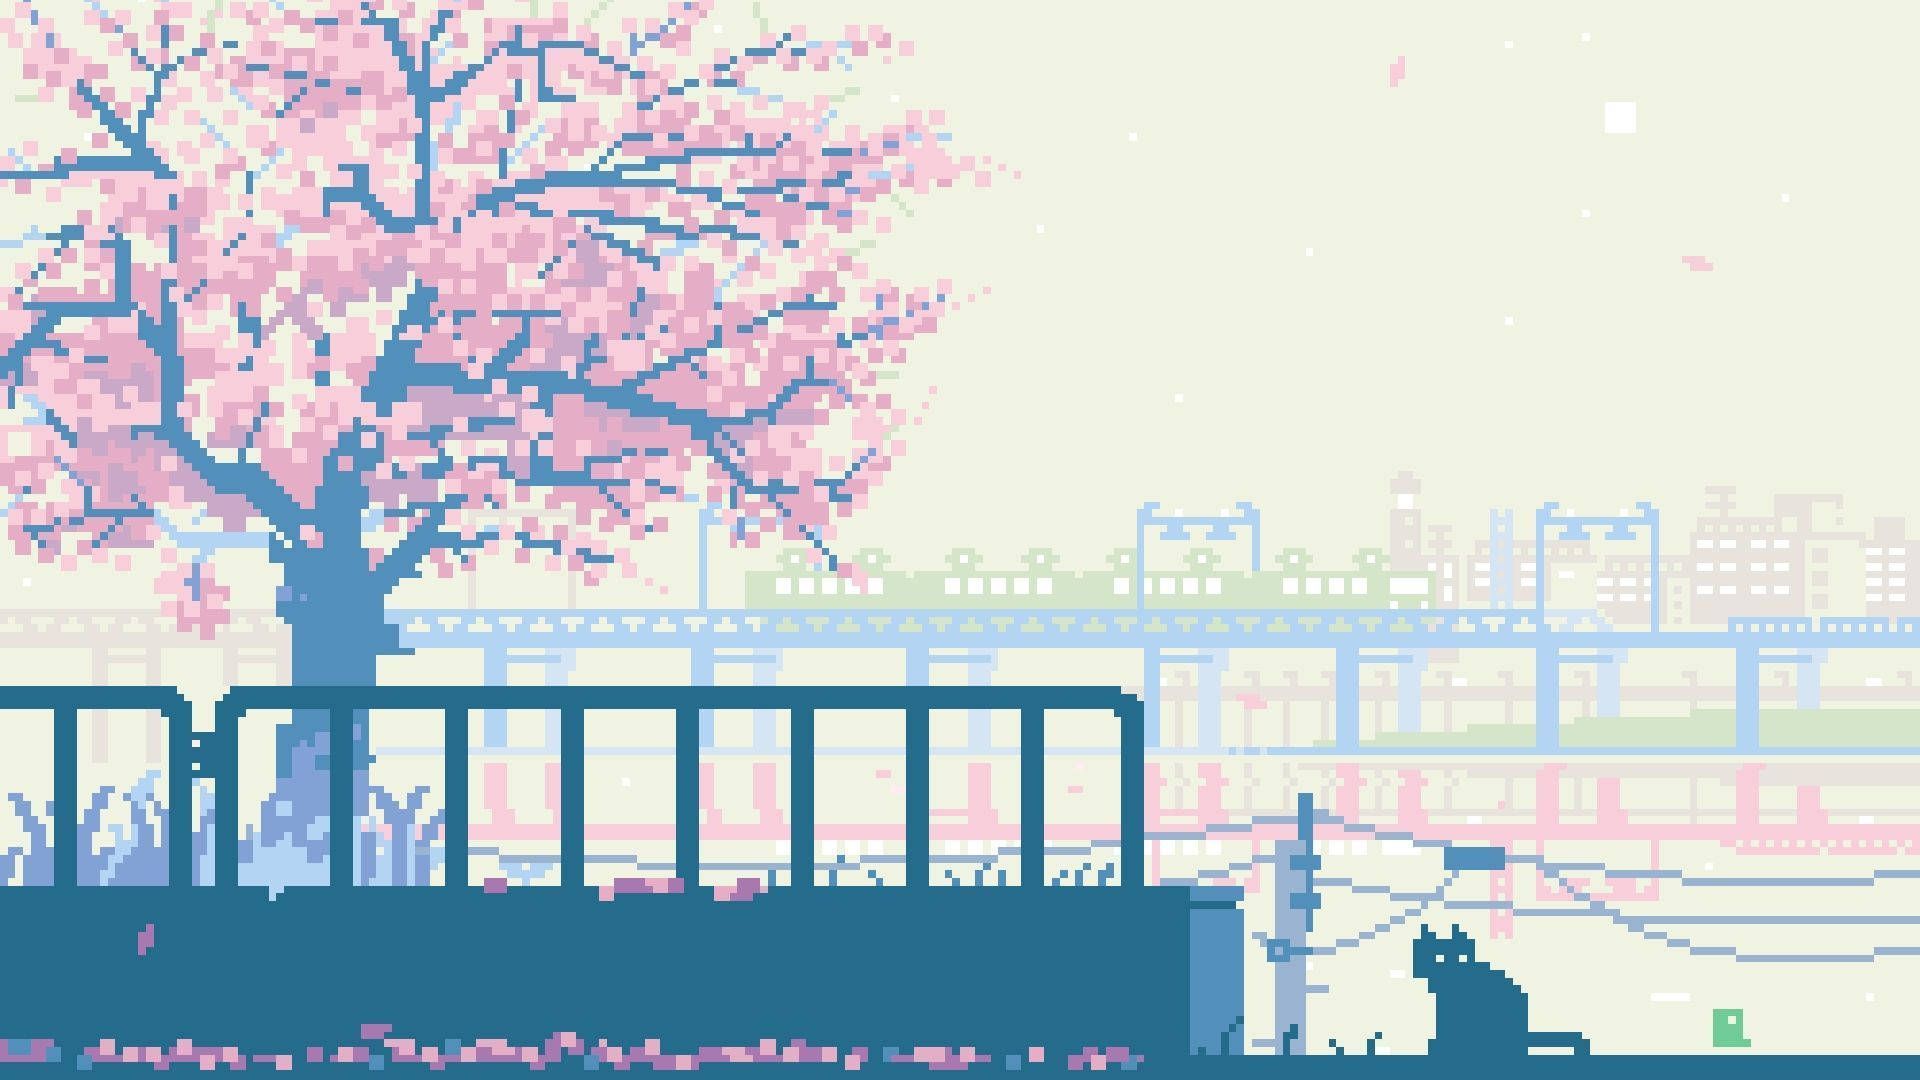 A man sitting on the grass underneath some trees - Kawaii, Japan, pixel art, cute, Korean, Japanese, colorful, anime, anime landscape